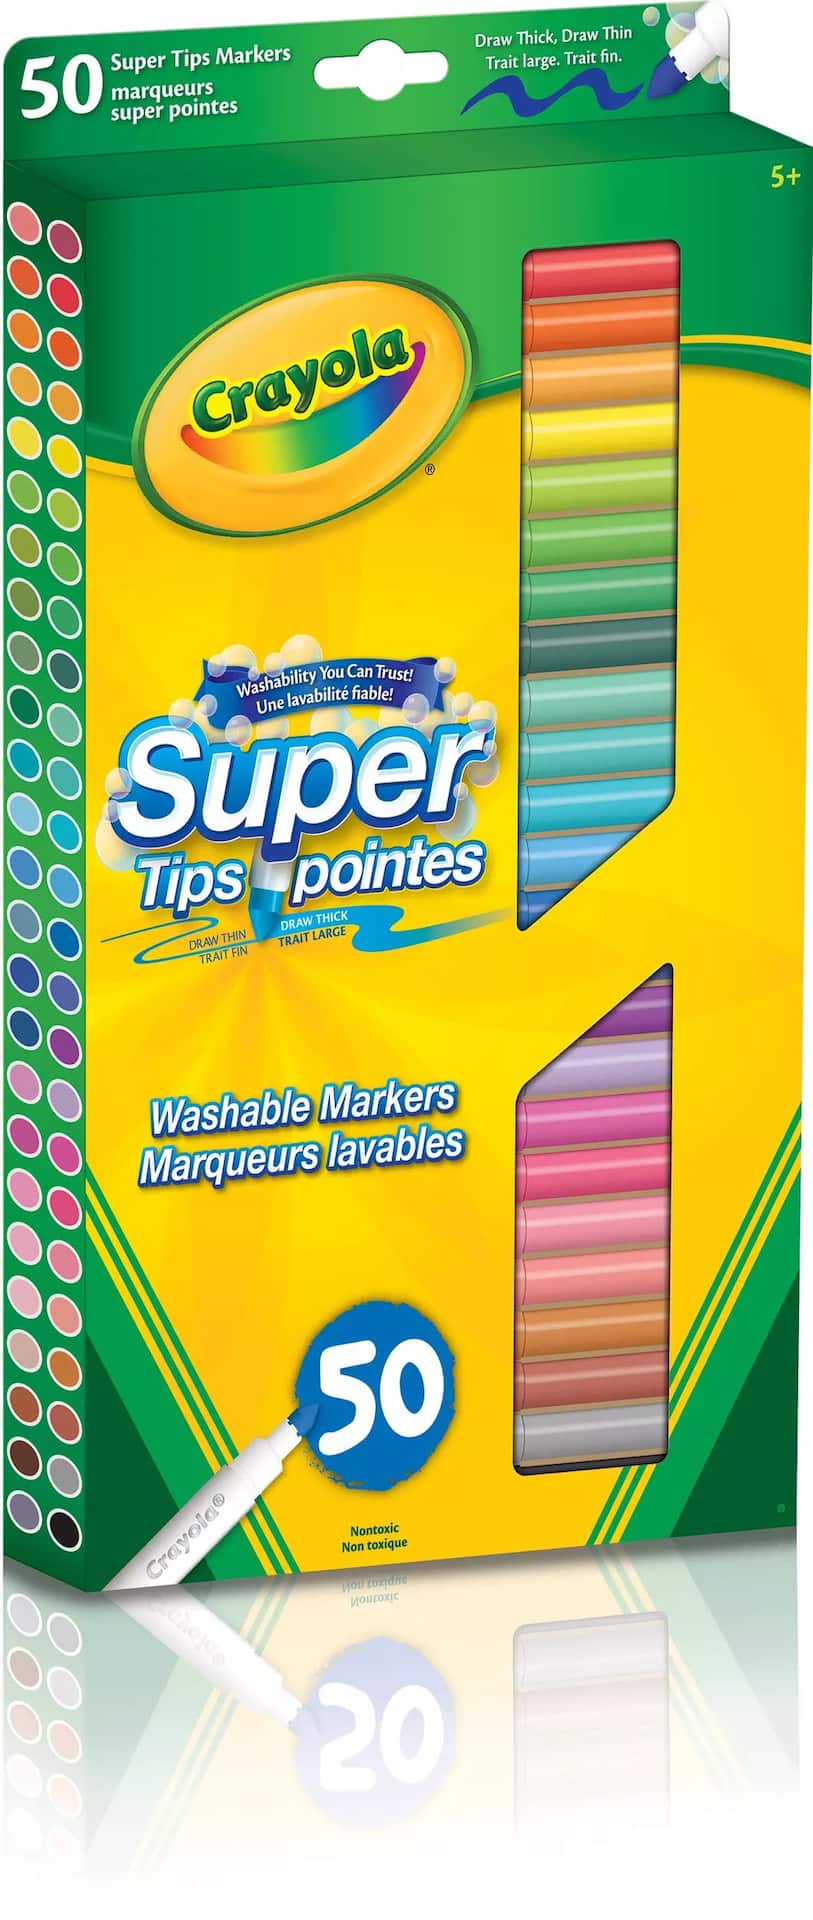 https://media-www.canadiantire.ca/product/seasonal-gardening/toys/home-office-supplies/1420195/crayola-supertip-50-pack-e188e0ad-ff9a-4c97-9791-ab1b4a23223b-jpgrendition.jpg